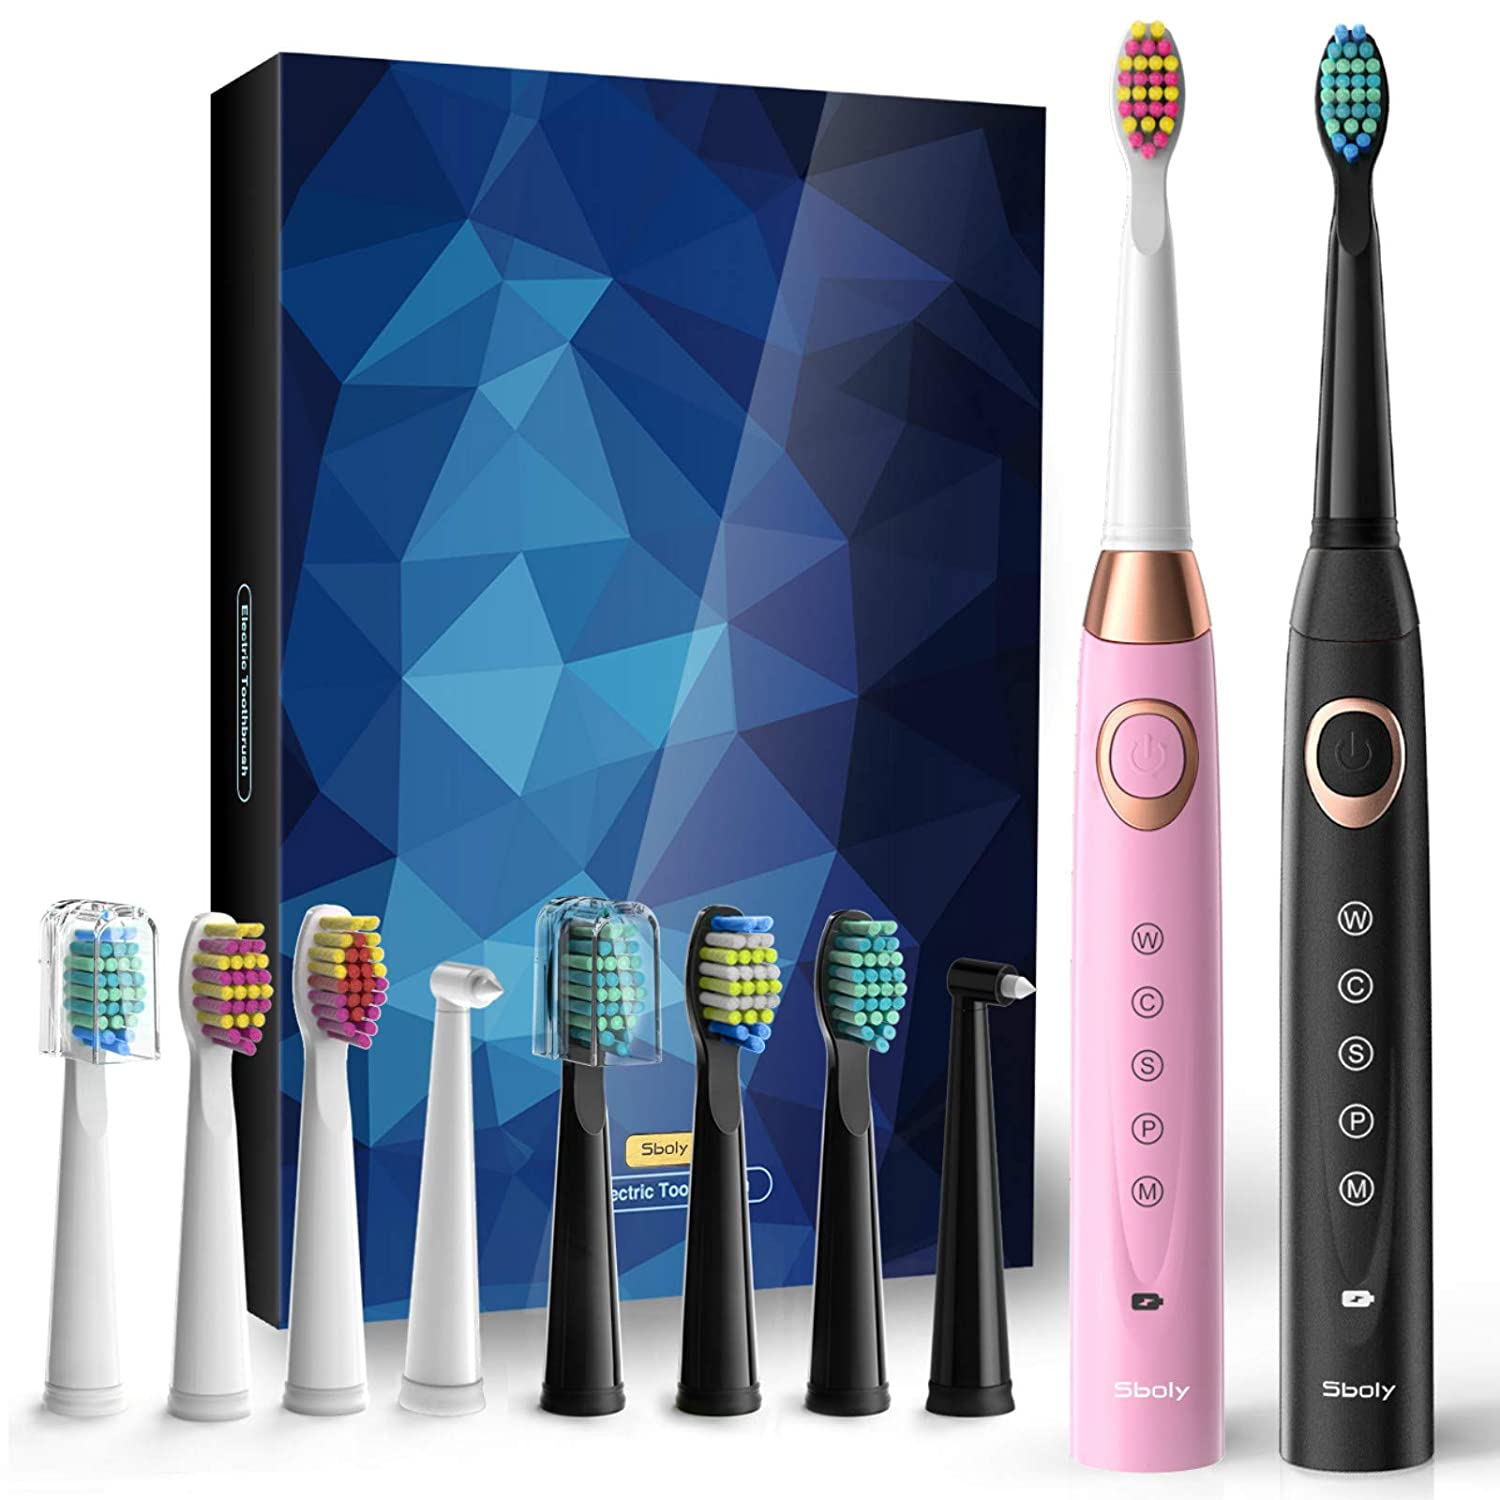 1. Sboly Electric Toothbrushes